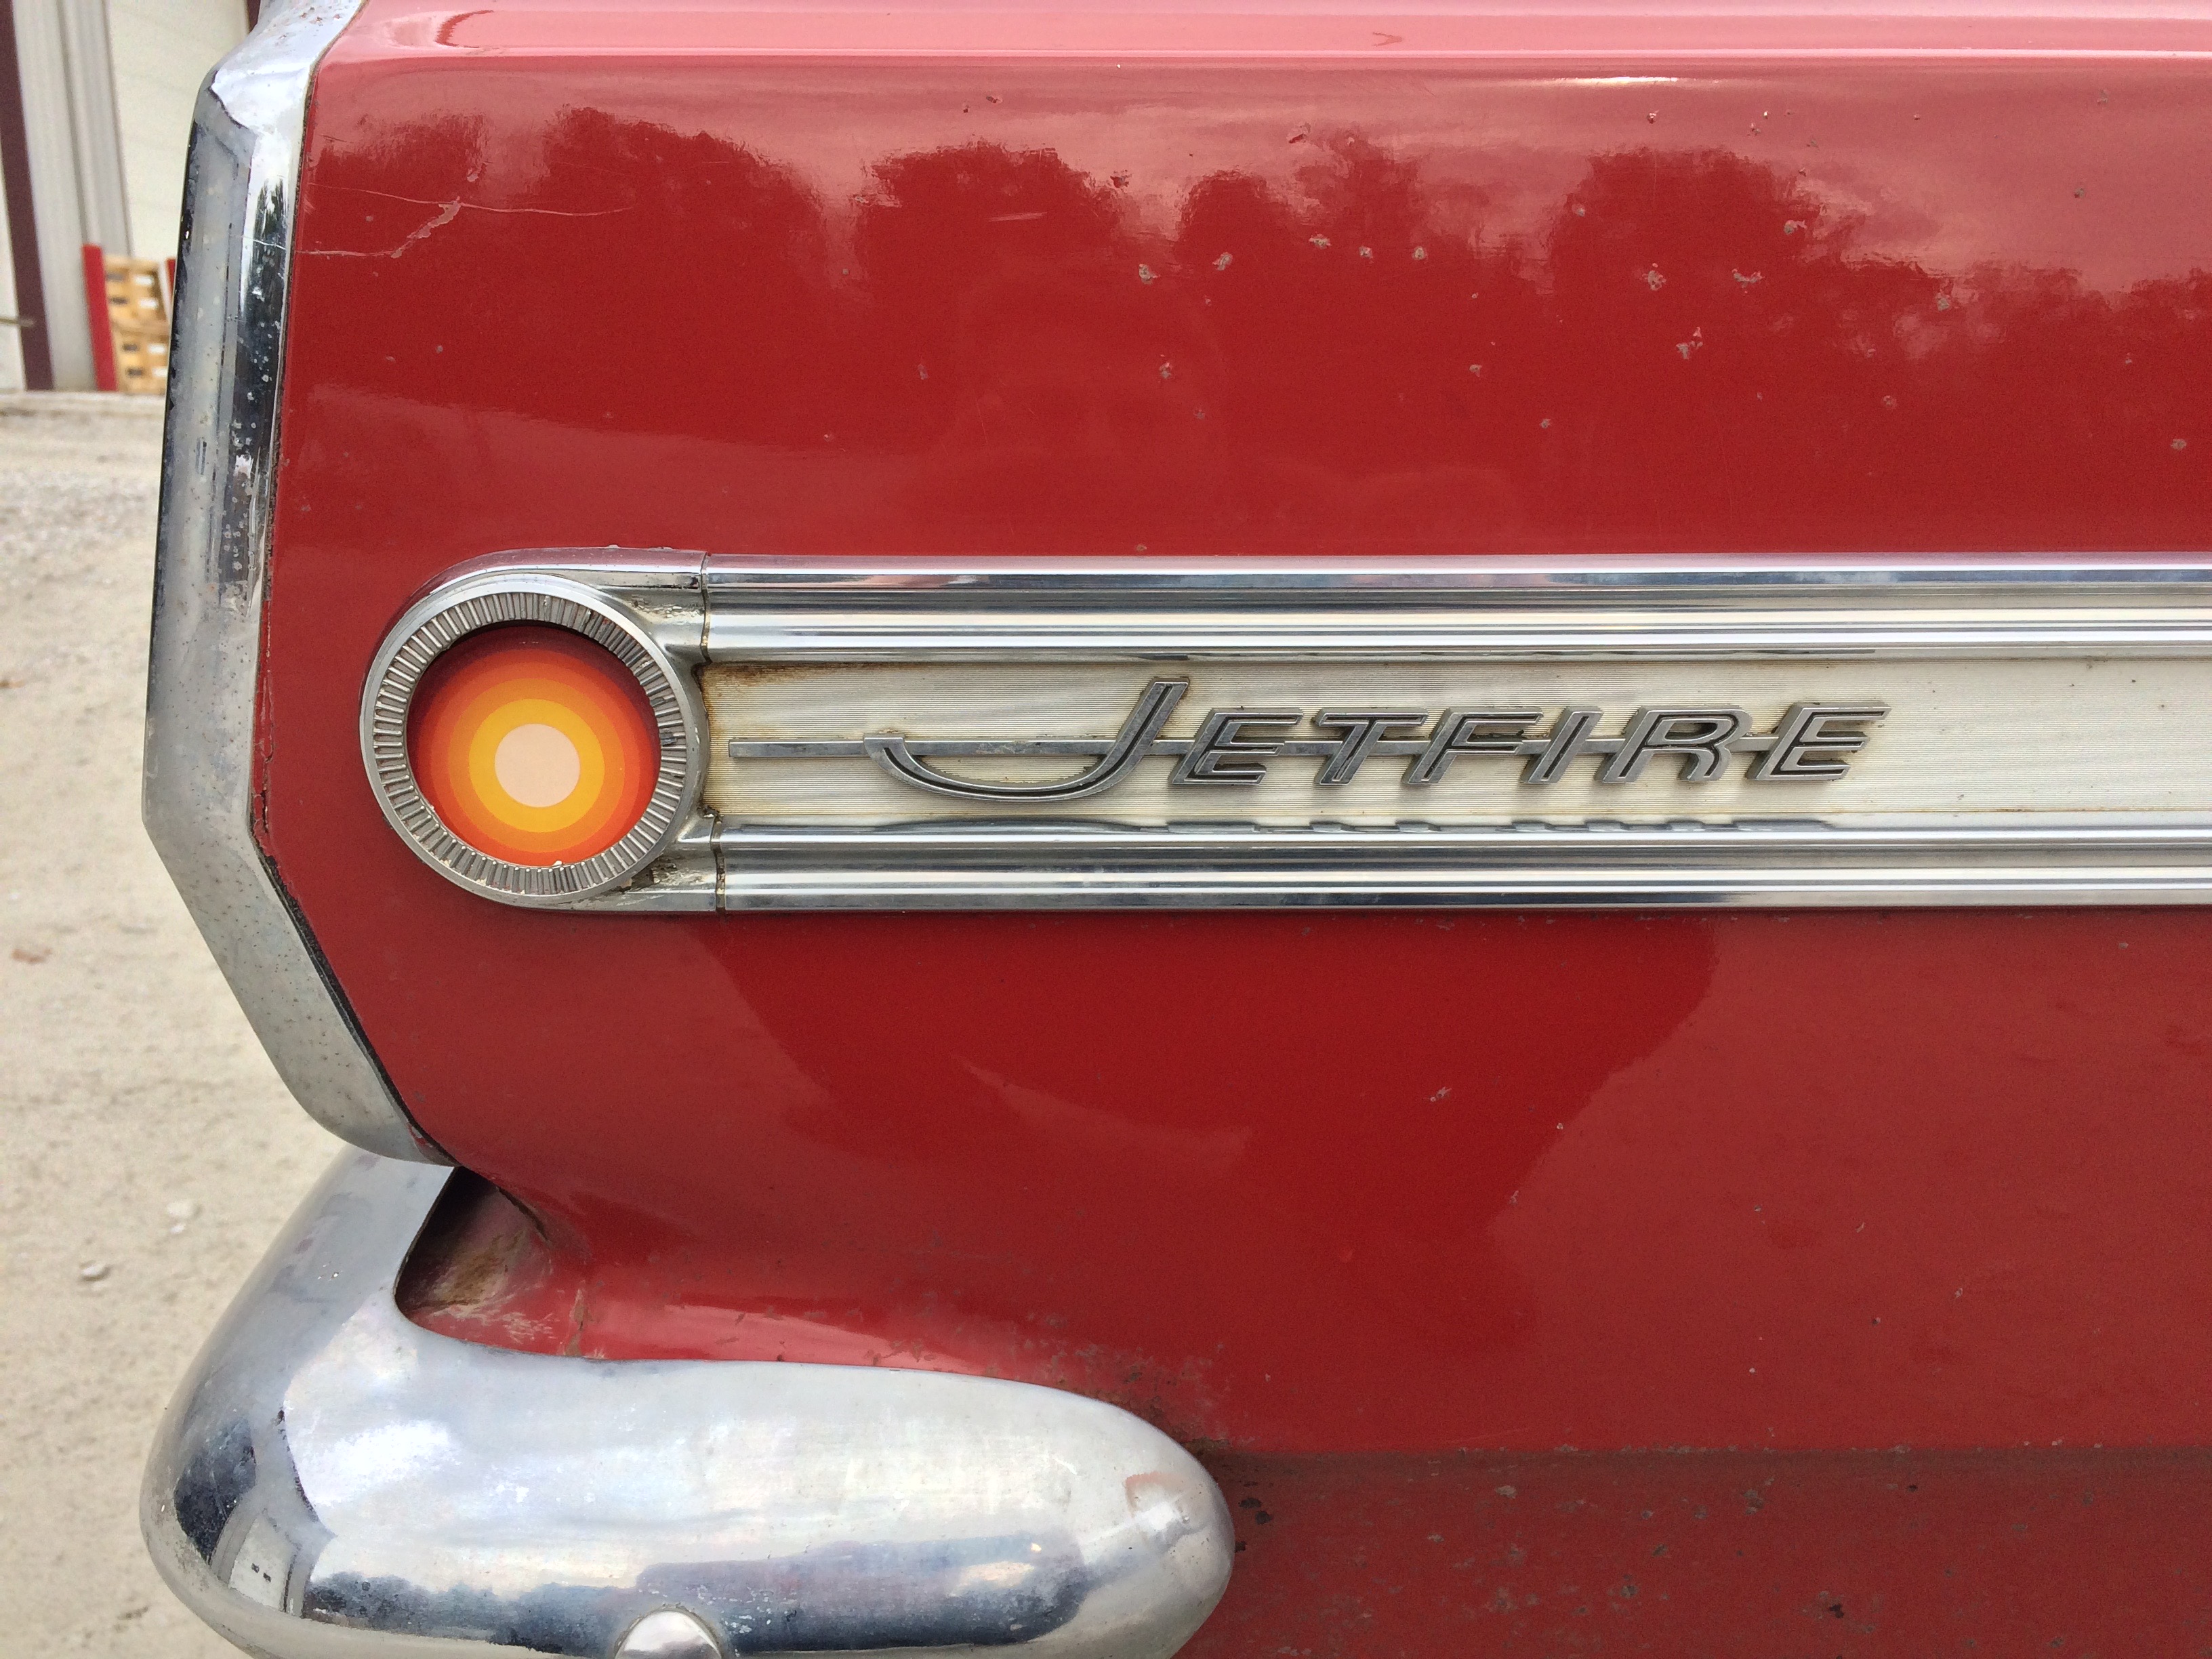 Barn-found, Family fascination leads to barn-found Oldsmobile Jetfire, ClassicCars.com Journal